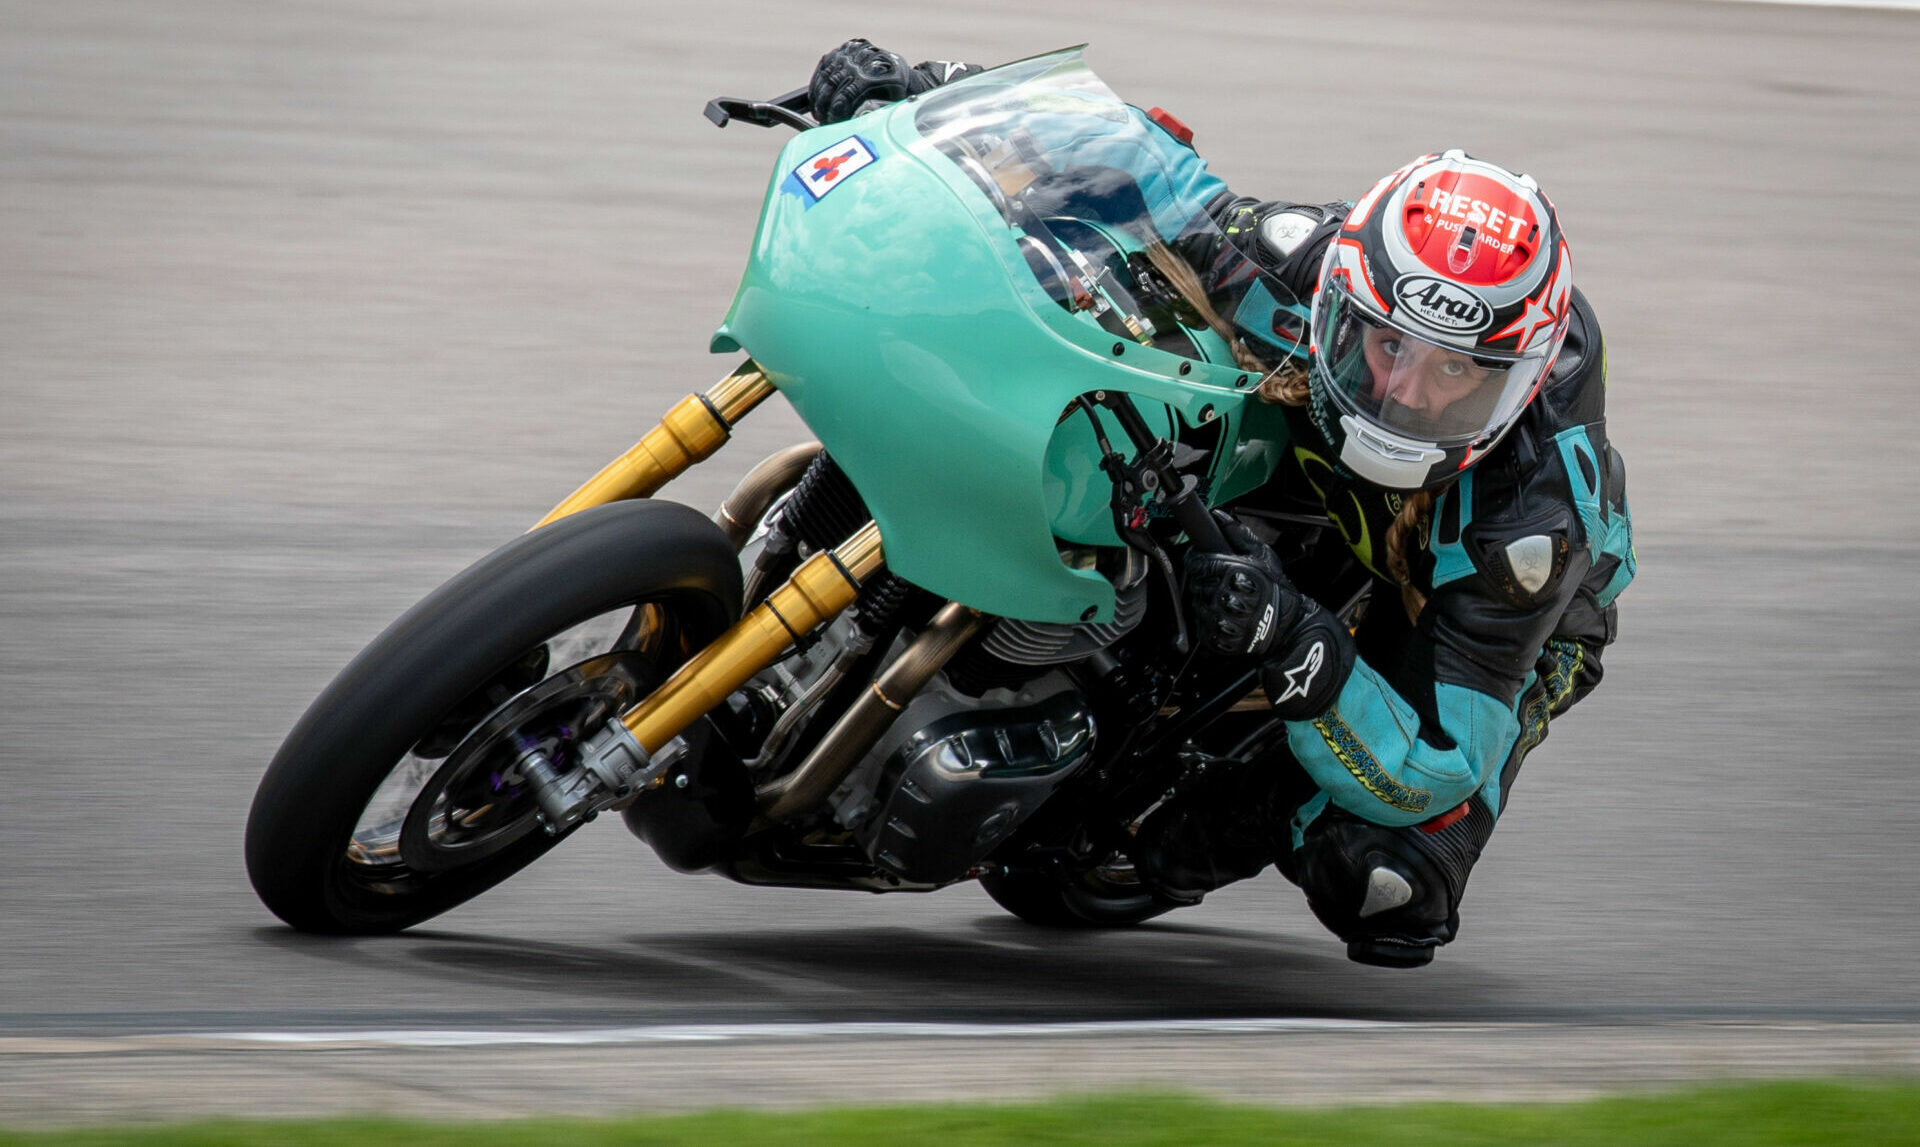 Kayleigh Buyck in action during the Royal Enfield test day at Barber Motorsports Park. Photo by Jen Muecke, courtesy Royal Enfield.